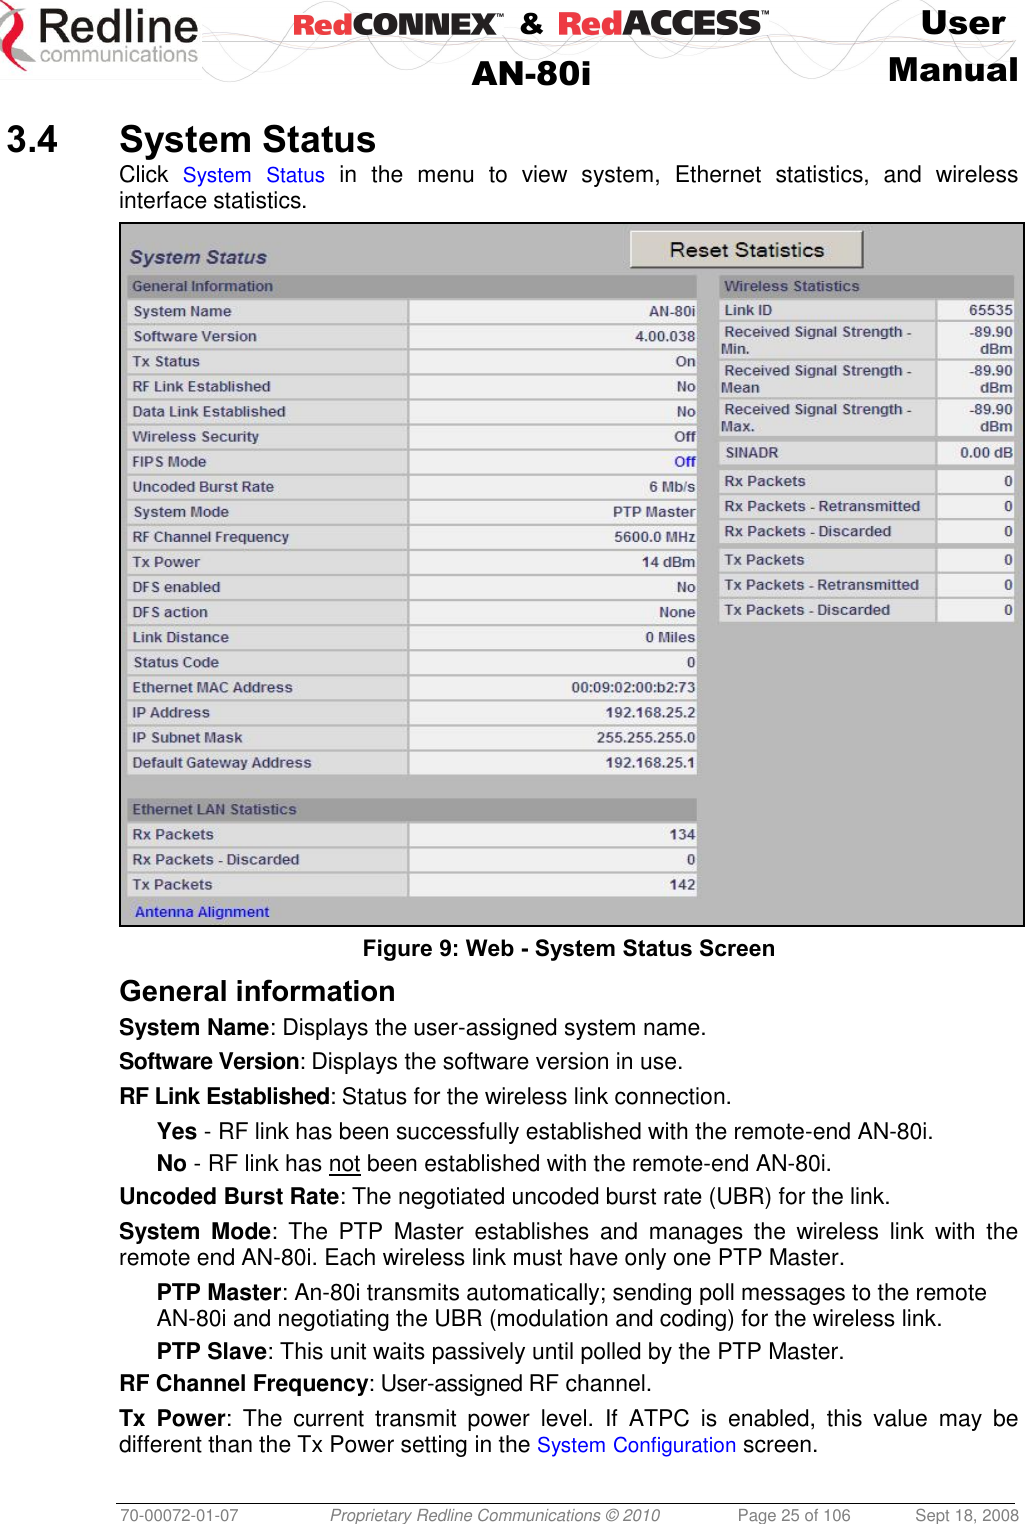    &amp;  User  AN-80i Manual  70-00072-01-07 Proprietary Redline Communications © 2010  Page 25 of 106  Sept 18, 2008  3.4 System Status Click  System Status in  the  menu  to  view  system,  Ethernet  statistics,  and  wireless interface statistics.  Figure 9: Web - System Status Screen General information System Name: Displays the user-assigned system name. Software Version: Displays the software version in use. RF Link Established: Status for the wireless link connection. Yes - RF link has been successfully established with the remote-end AN-80i. No - RF link has not been established with the remote-end AN-80i. Uncoded Burst Rate: The negotiated uncoded burst rate (UBR) for the link. System  Mode:  The  PTP  Master  establishes  and  manages  the  wireless  link  with  the remote end AN-80i. Each wireless link must have only one PTP Master. PTP Master: An-80i transmits automatically; sending poll messages to the remote AN-80i and negotiating the UBR (modulation and coding) for the wireless link. PTP Slave: This unit waits passively until polled by the PTP Master. RF Channel Frequency: User-assigned RF channel. Tx  Power: The  current  transmit  power  level.  If  ATPC  is  enabled,  this  value  may  be different than the Tx Power setting in the System Configuration screen. 